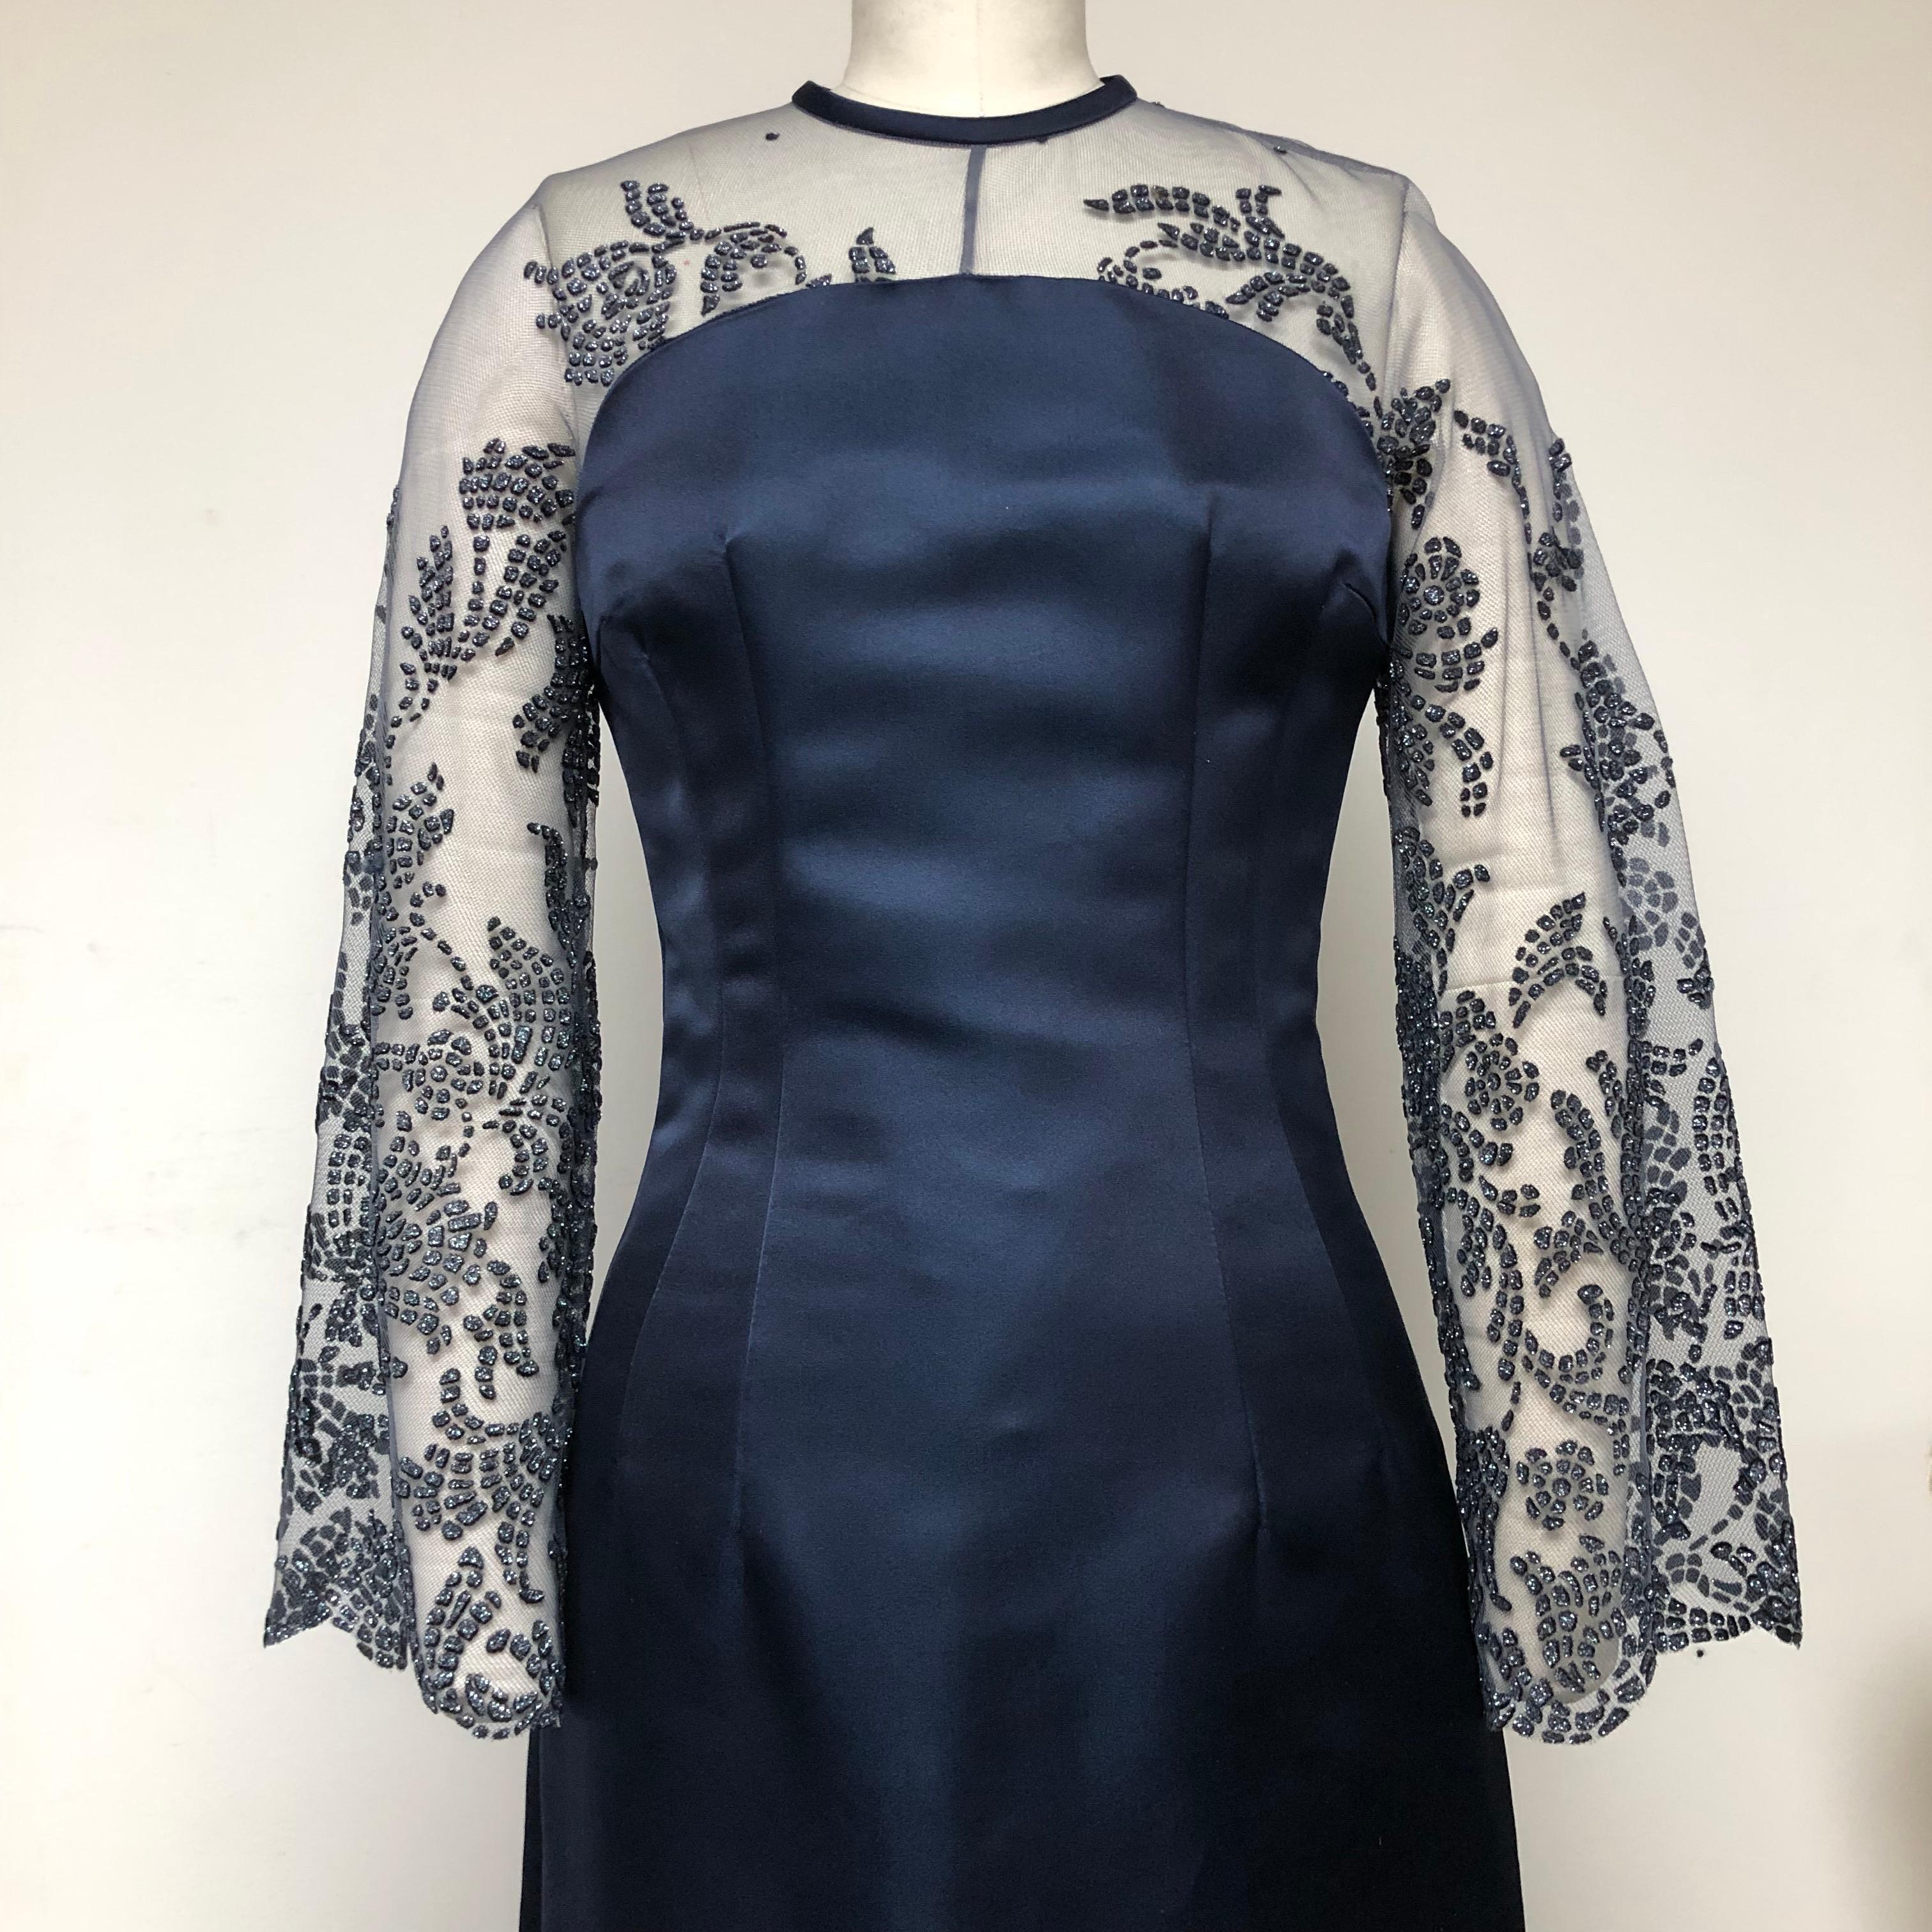 Unparallelled classic elegance! Forever! 100% Taroni navy silk gown in luxurious double faced satin with upper bodice and sleeve in embellished tulle. Double darts emphasize the waist, which gives a shapely fit. Perfect for black tie occasions and